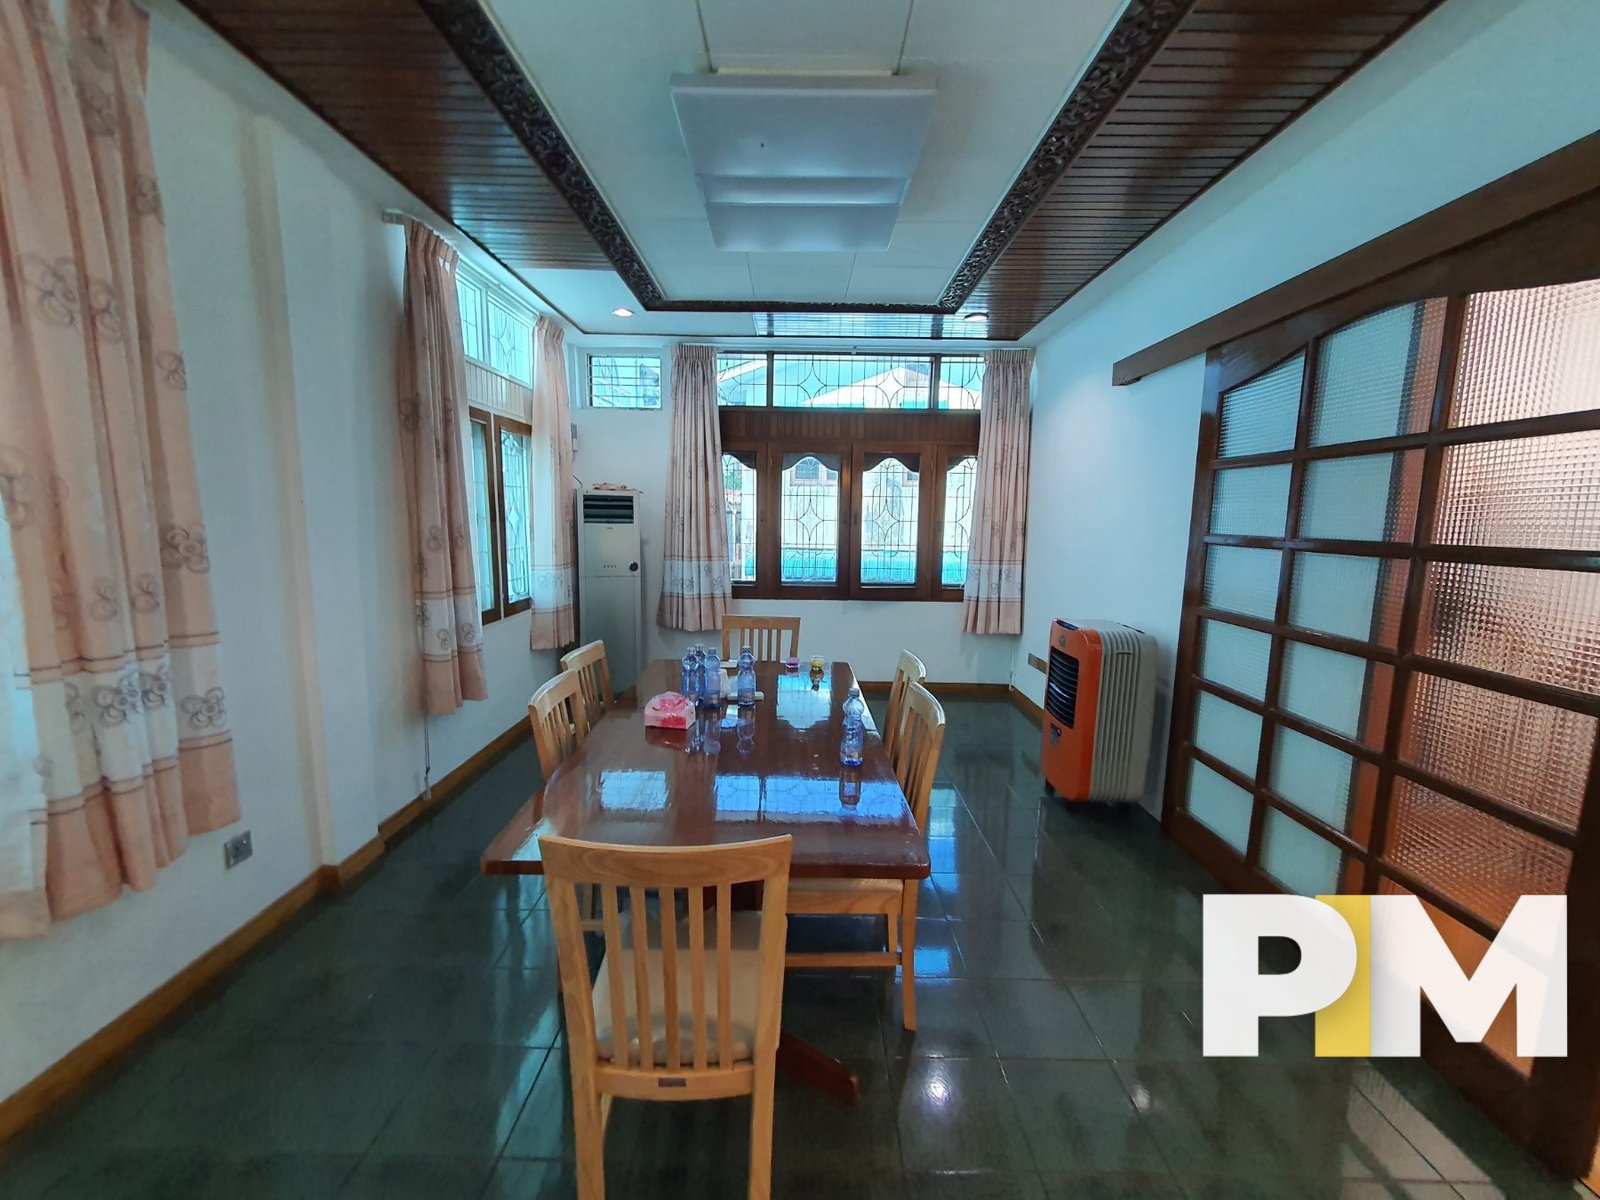 Dining room with table and chairs - Myanmar Real Estate